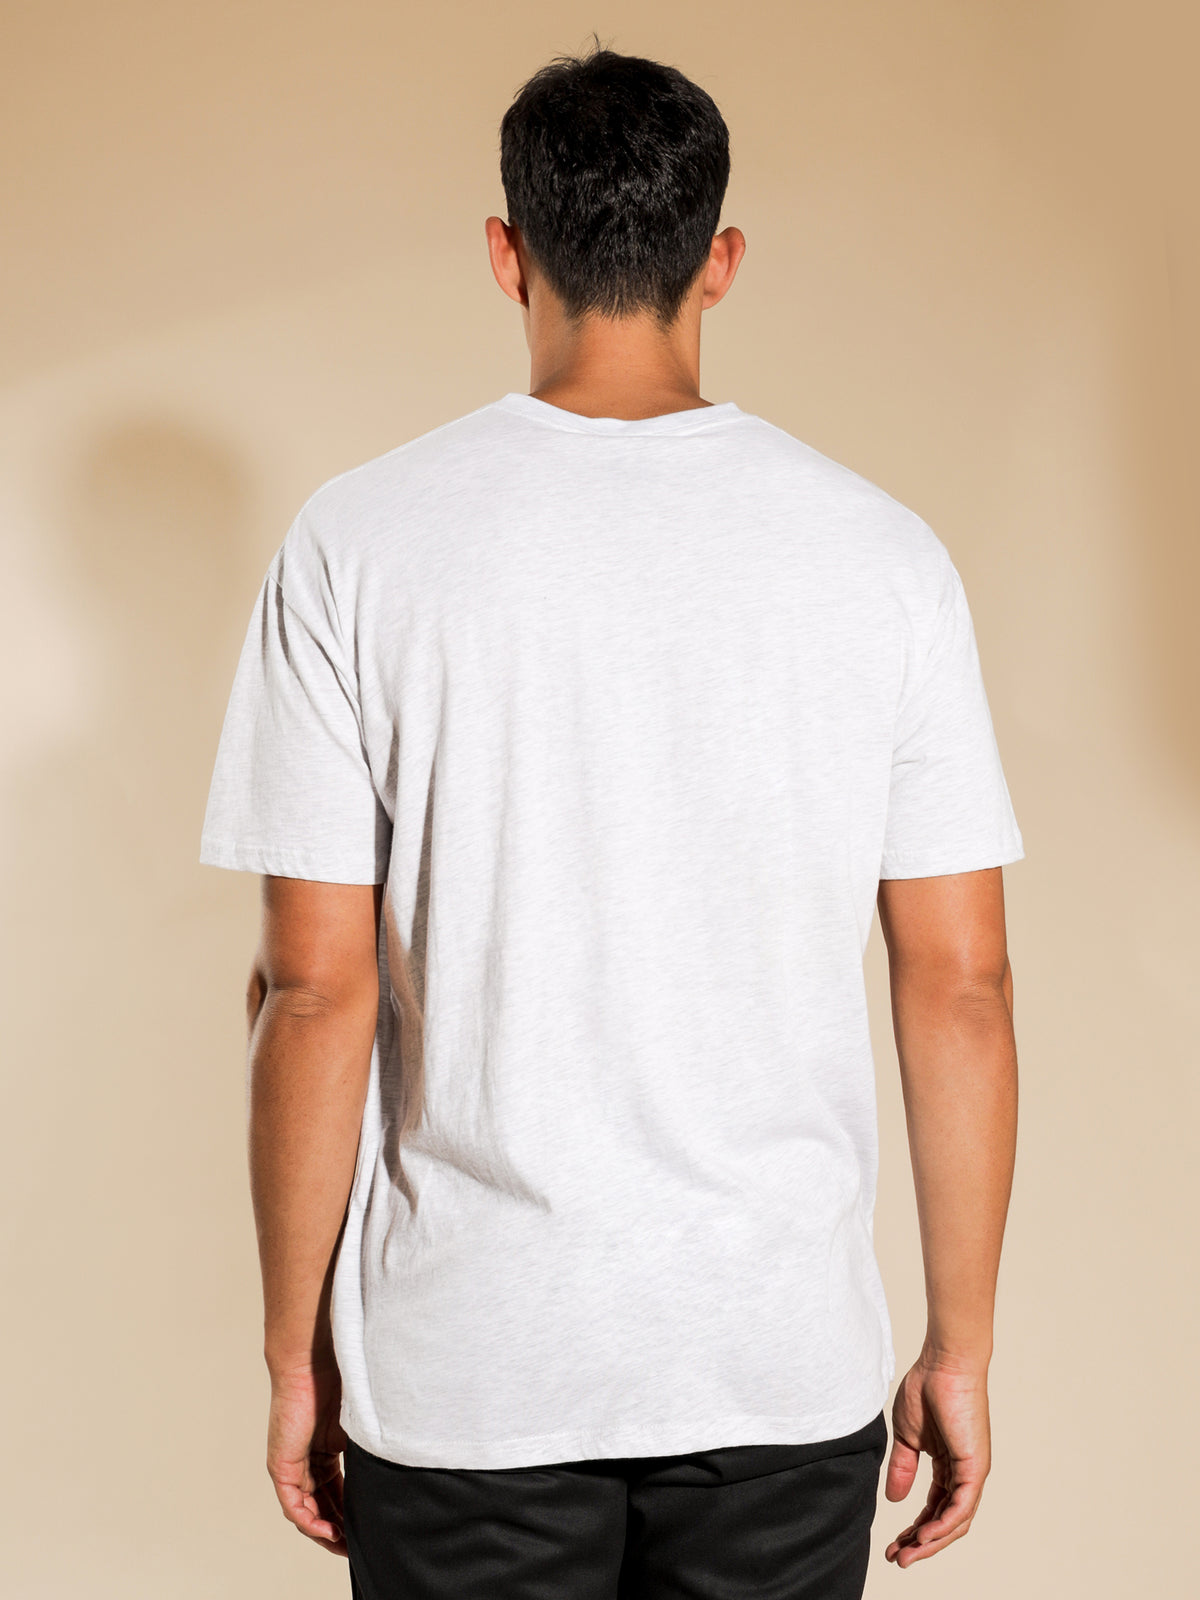 Corp Short Sleeve T-Shirt in Snow Marle